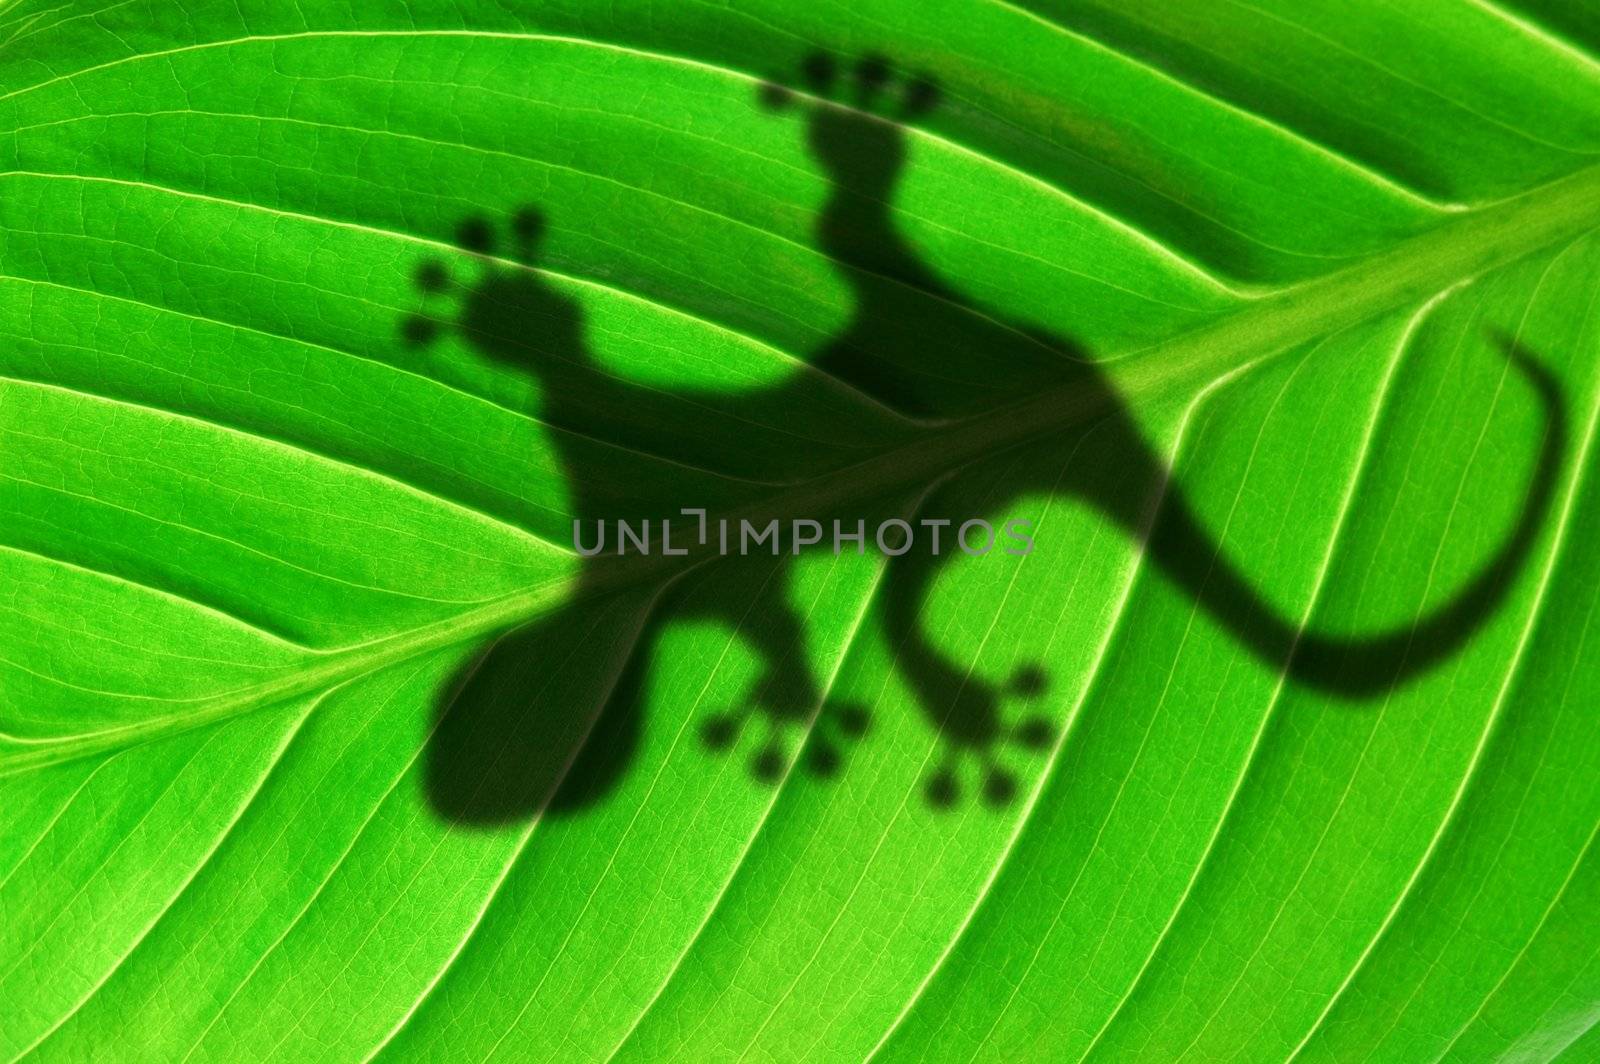 gecko shadow on green leaf texture showing nature concept with copyspace